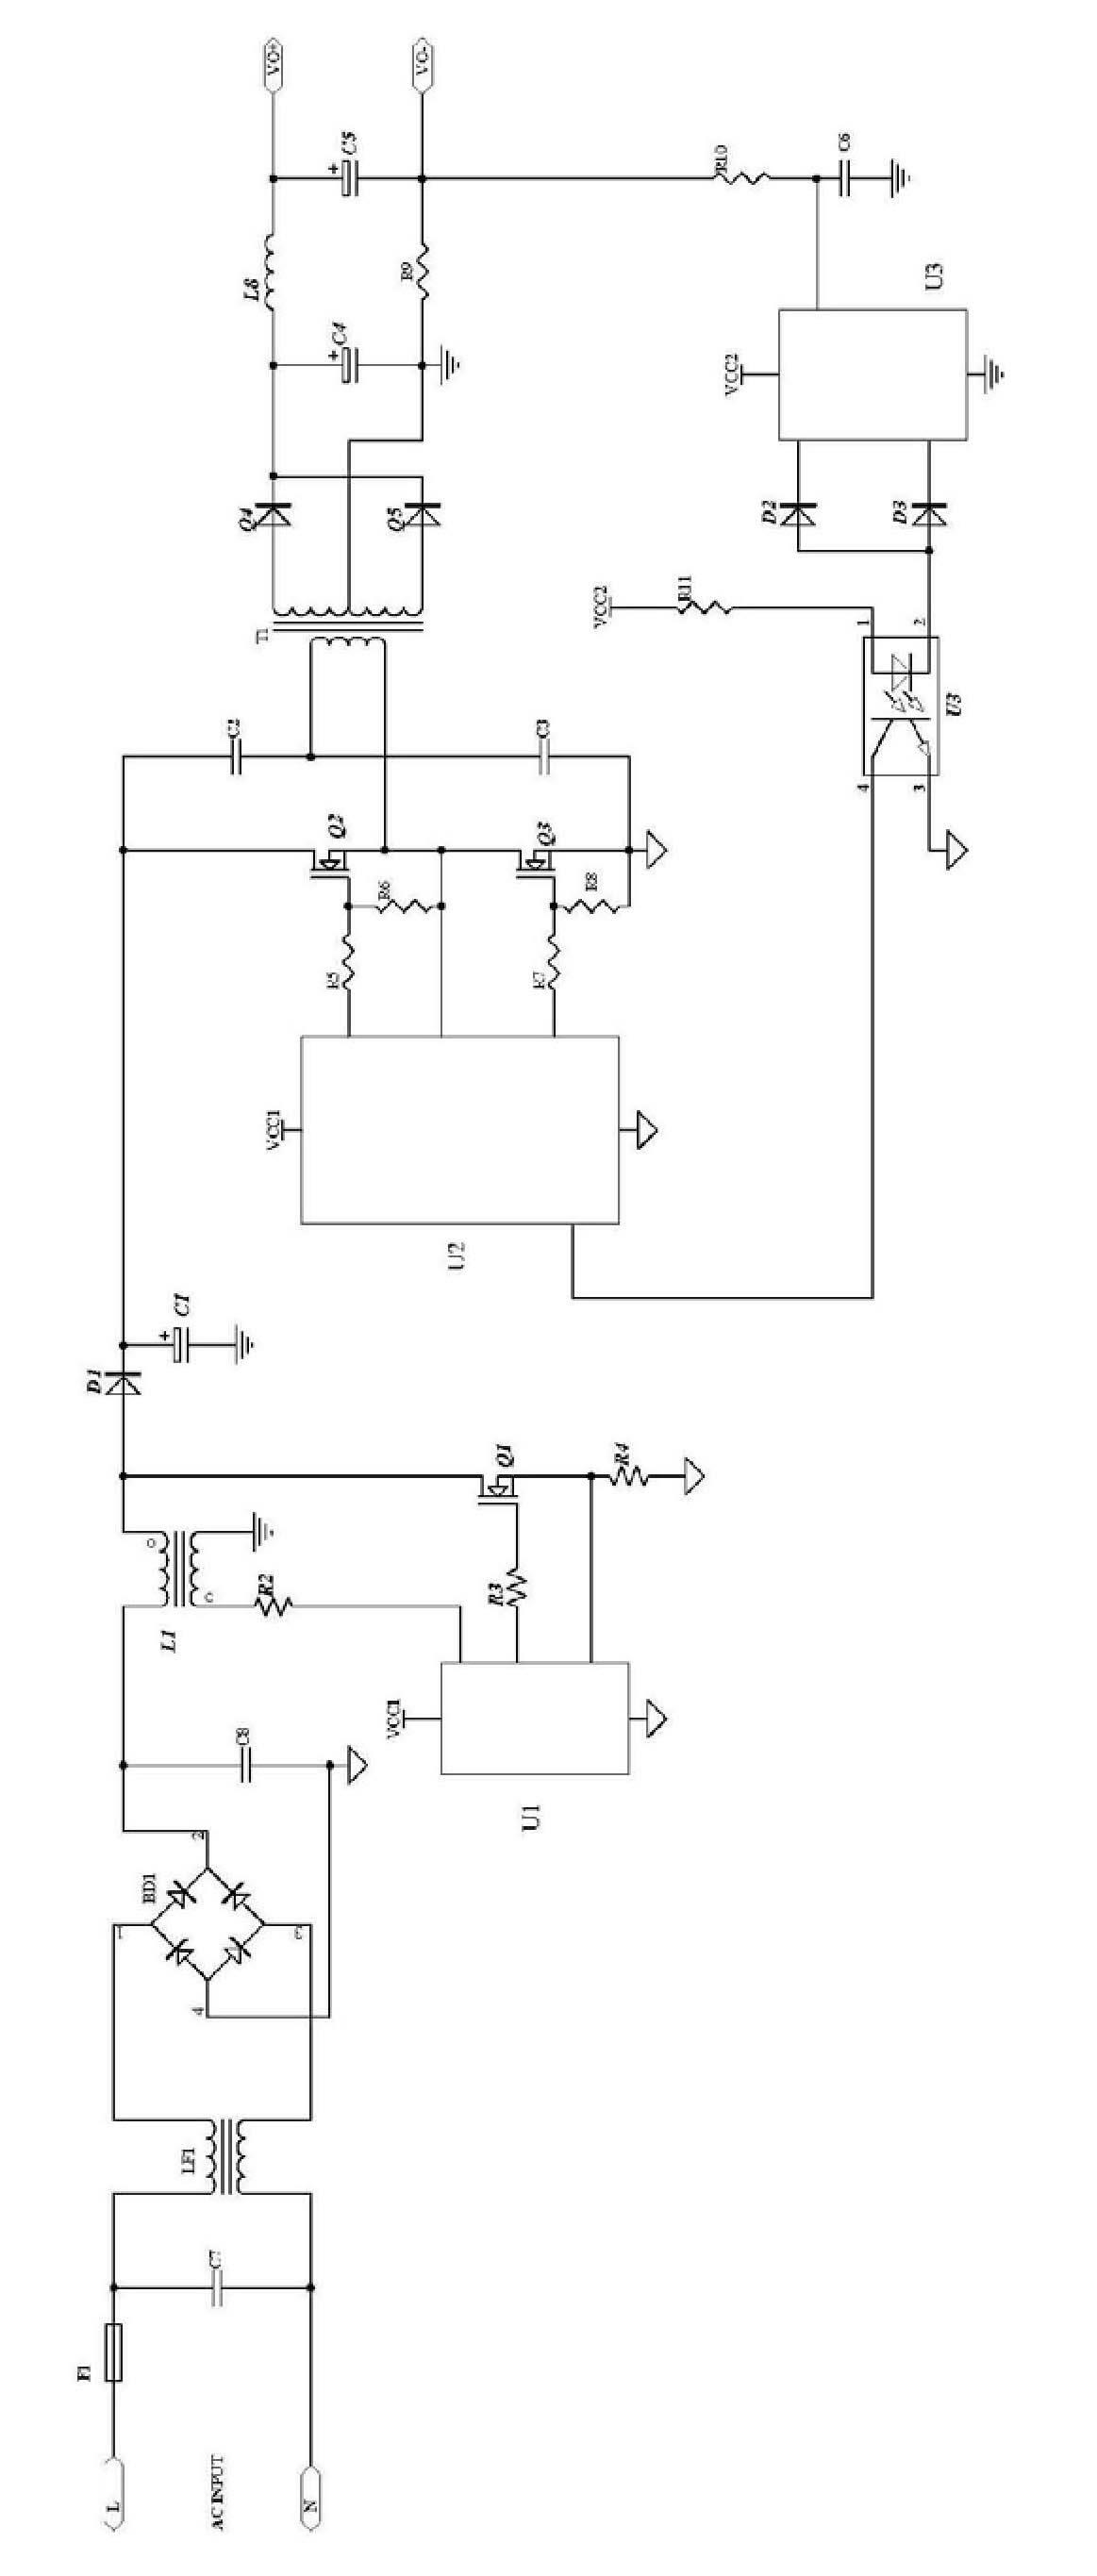 A half-bridge circuit with ultra-wide range constant current that realizes regulation from 0v